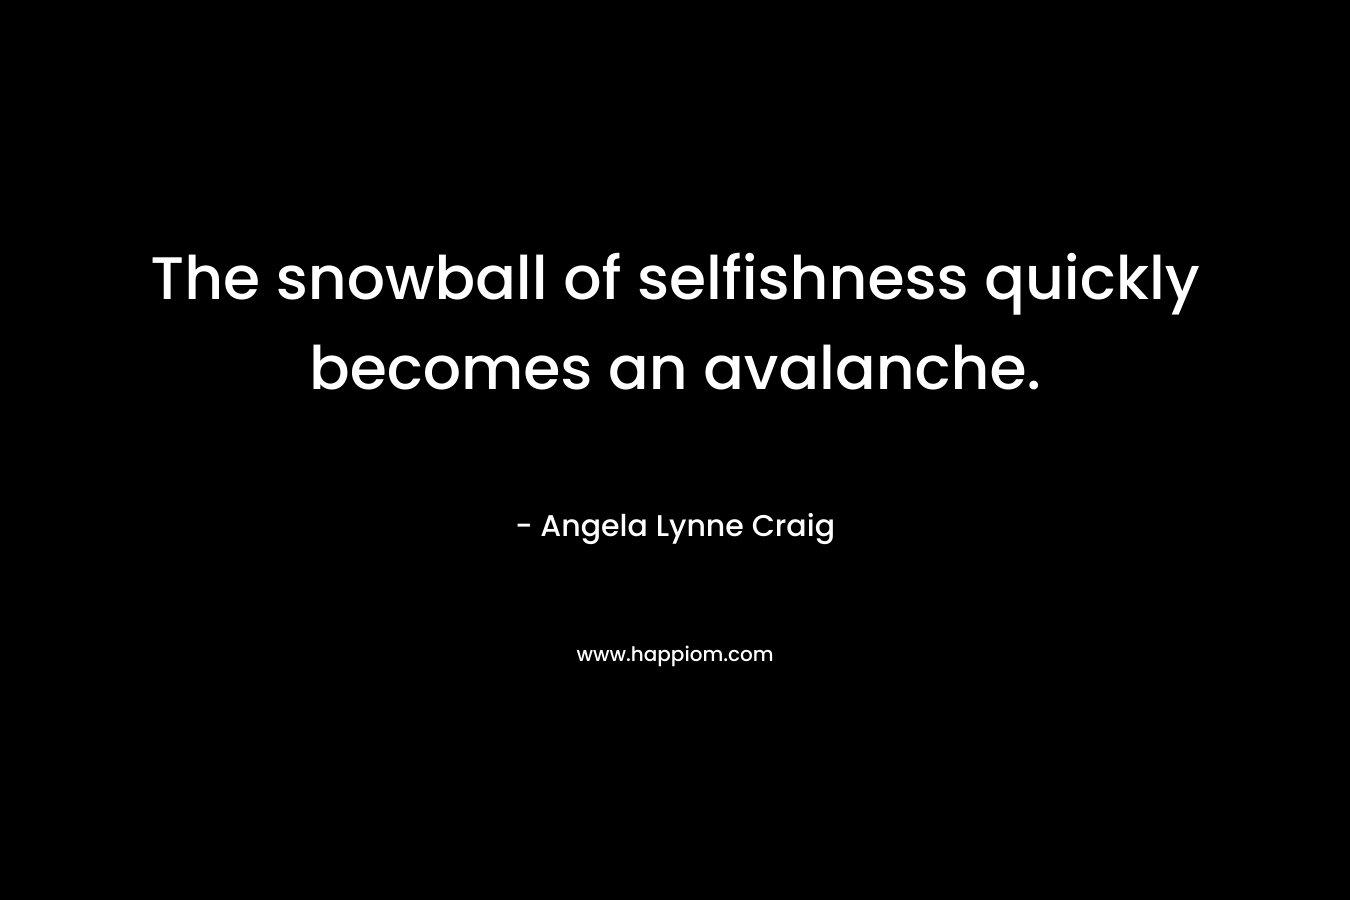 The snowball of selfishness quickly becomes an avalanche. – Angela Lynne Craig